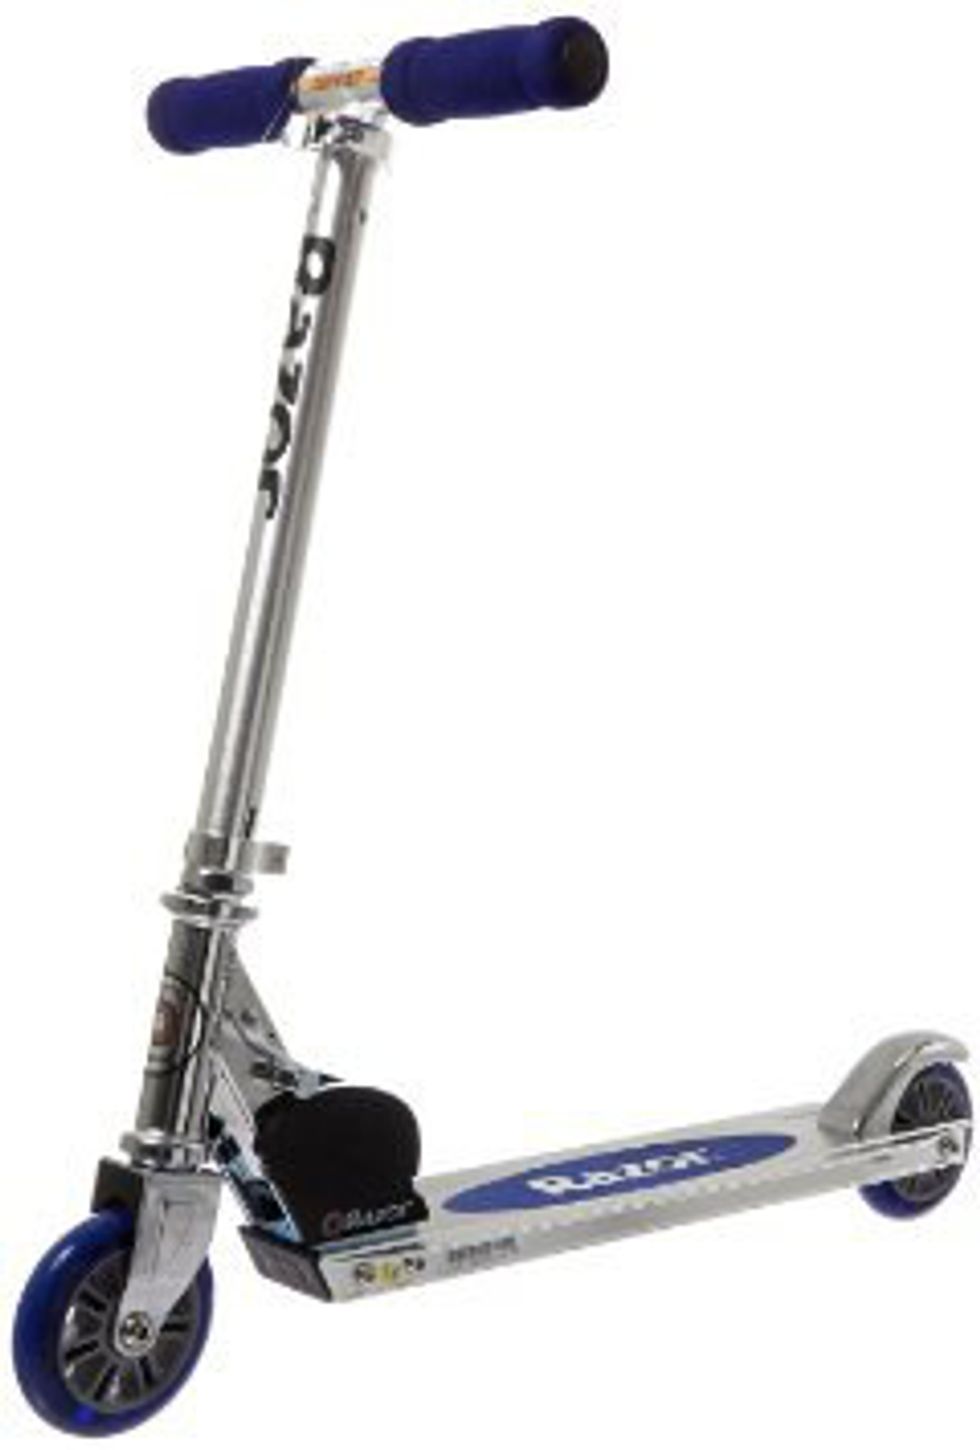 Silver and blue Razor scooter